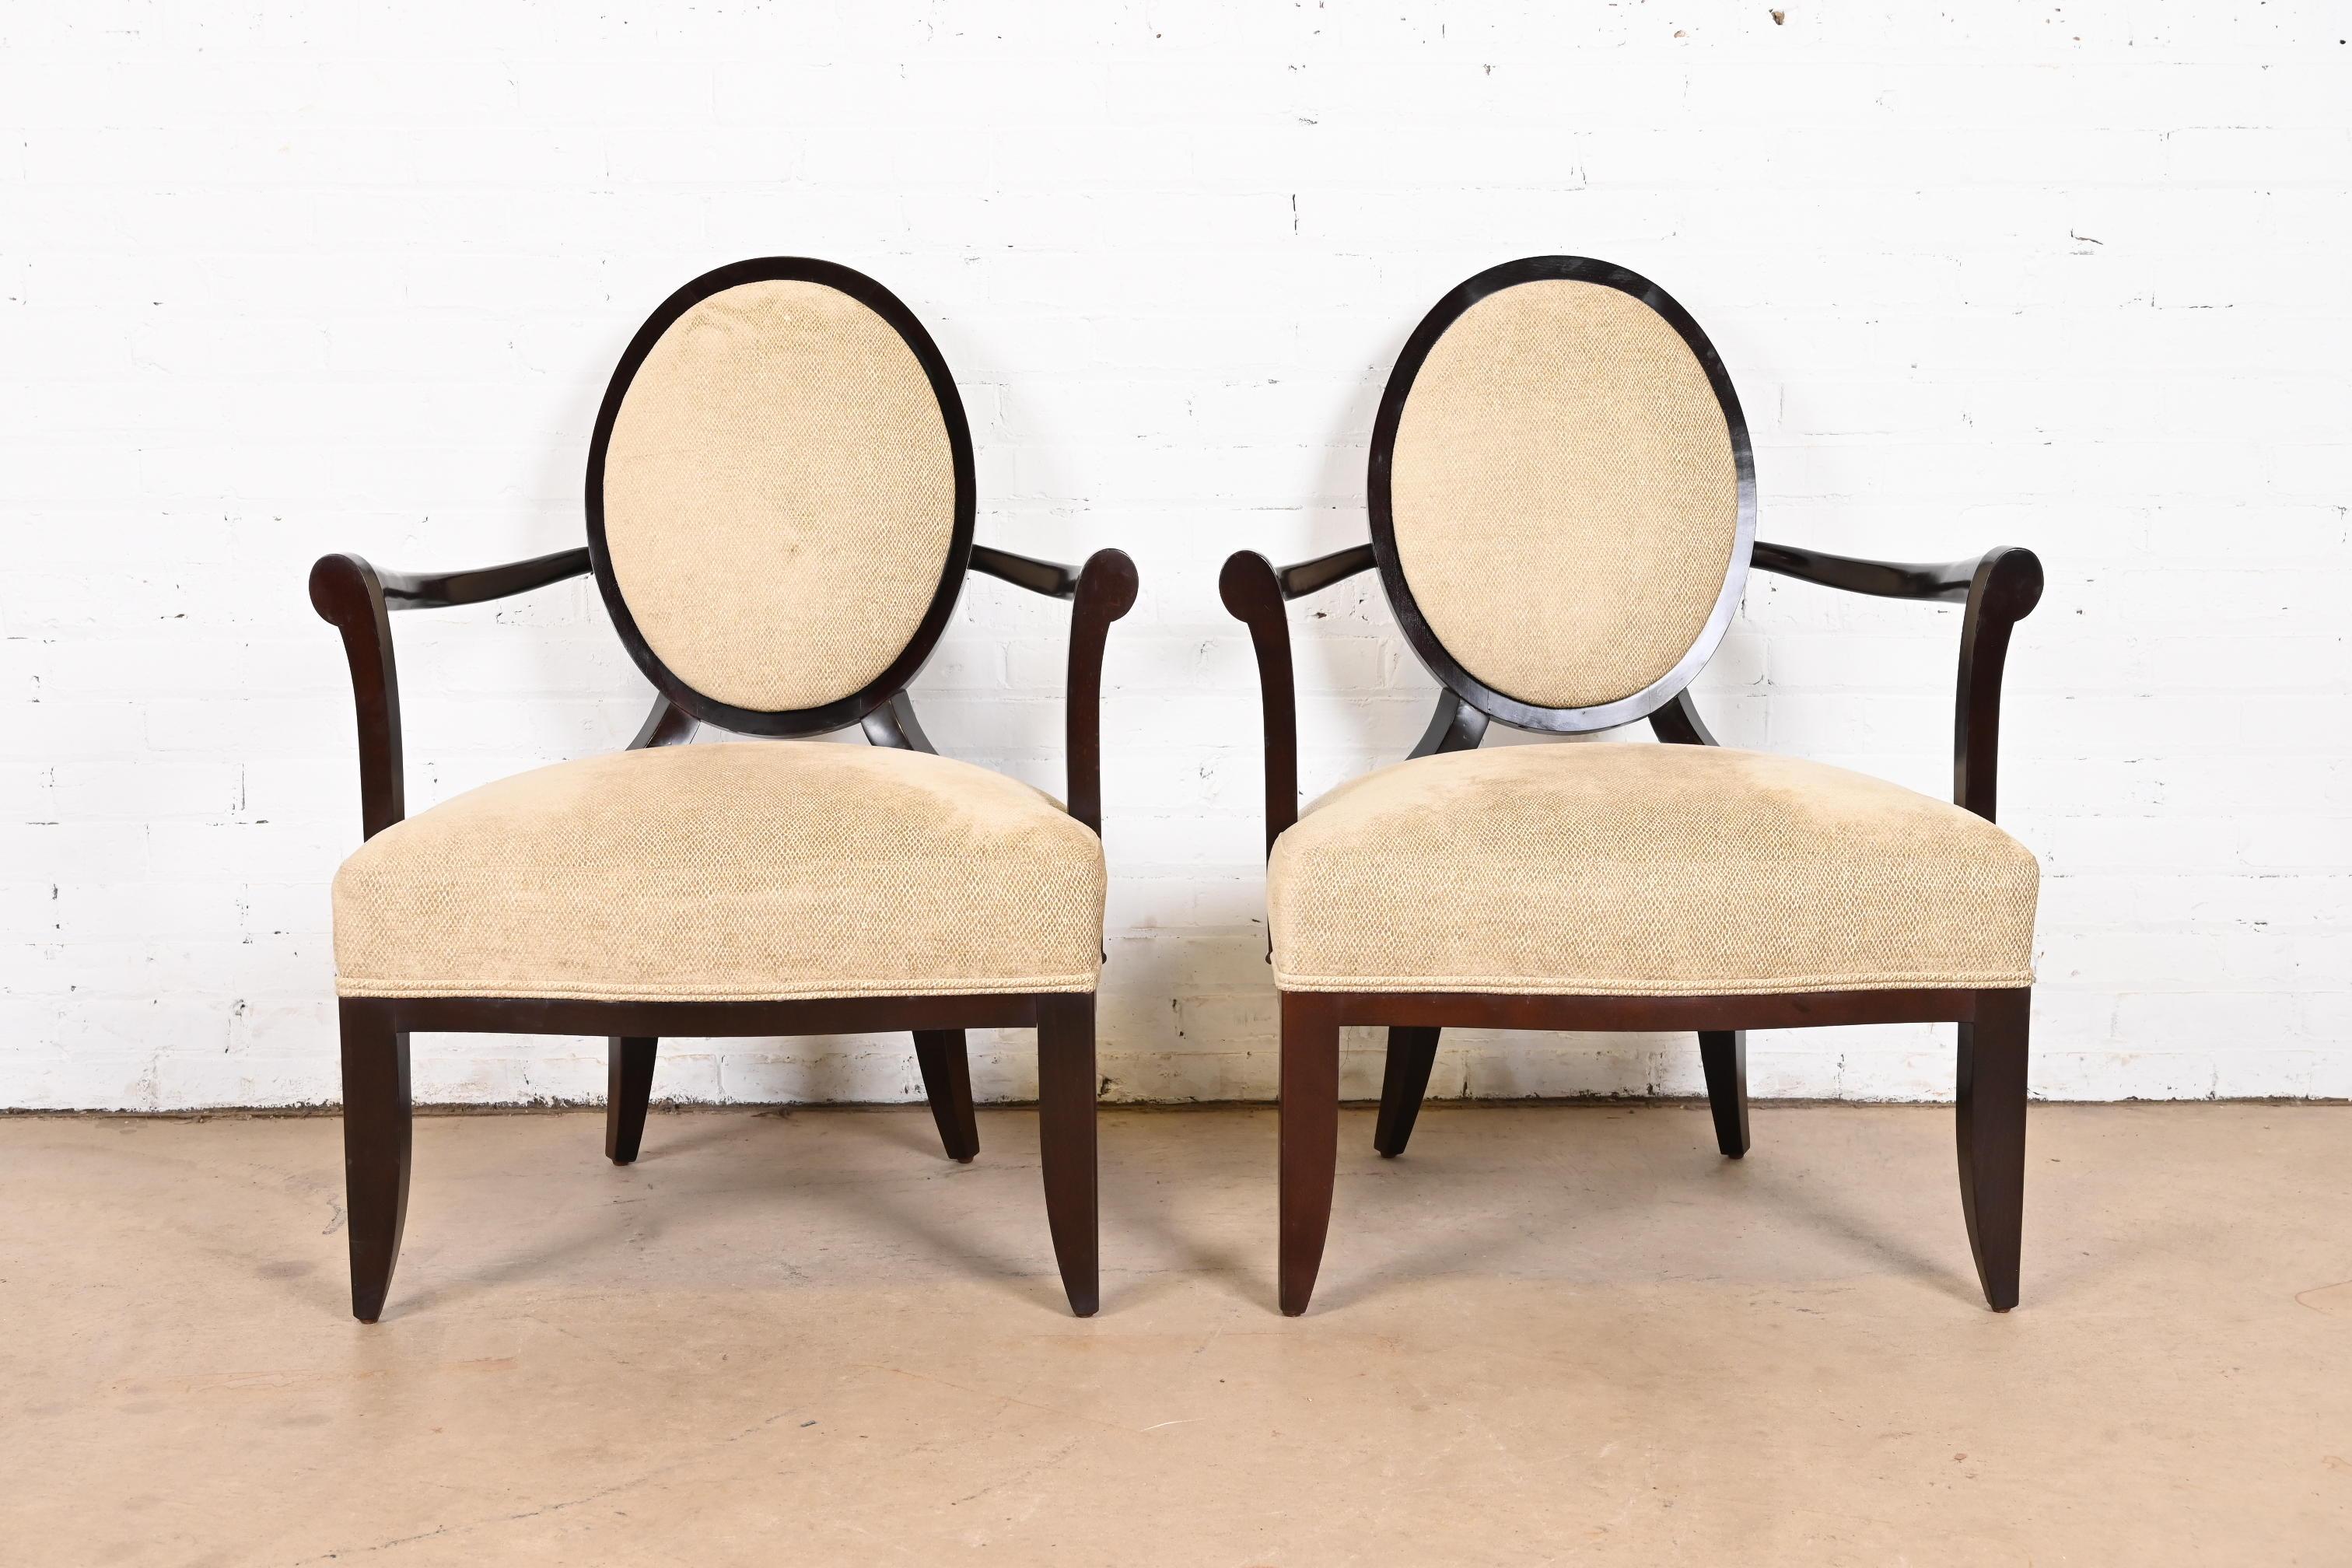 Modern Barbara Barry for Baker Furniture Contemporary Oval X-Back Lounge Chairs, Pair